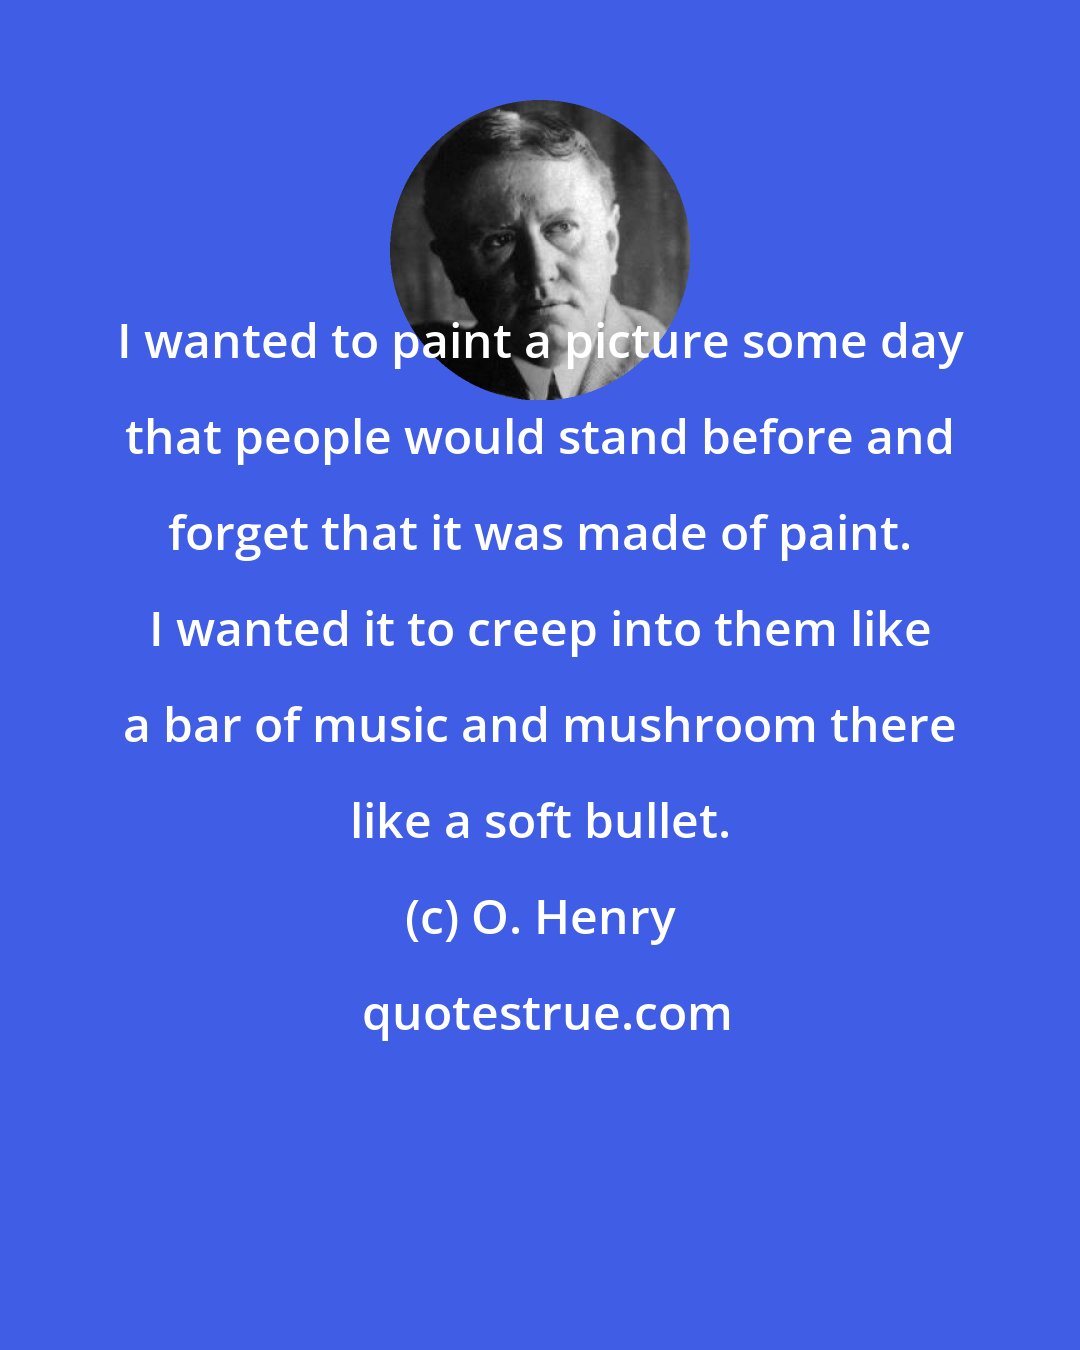 O. Henry: I wanted to paint a picture some day that people would stand before and forget that it was made of paint. I wanted it to creep into them like a bar of music and mushroom there like a soft bullet.